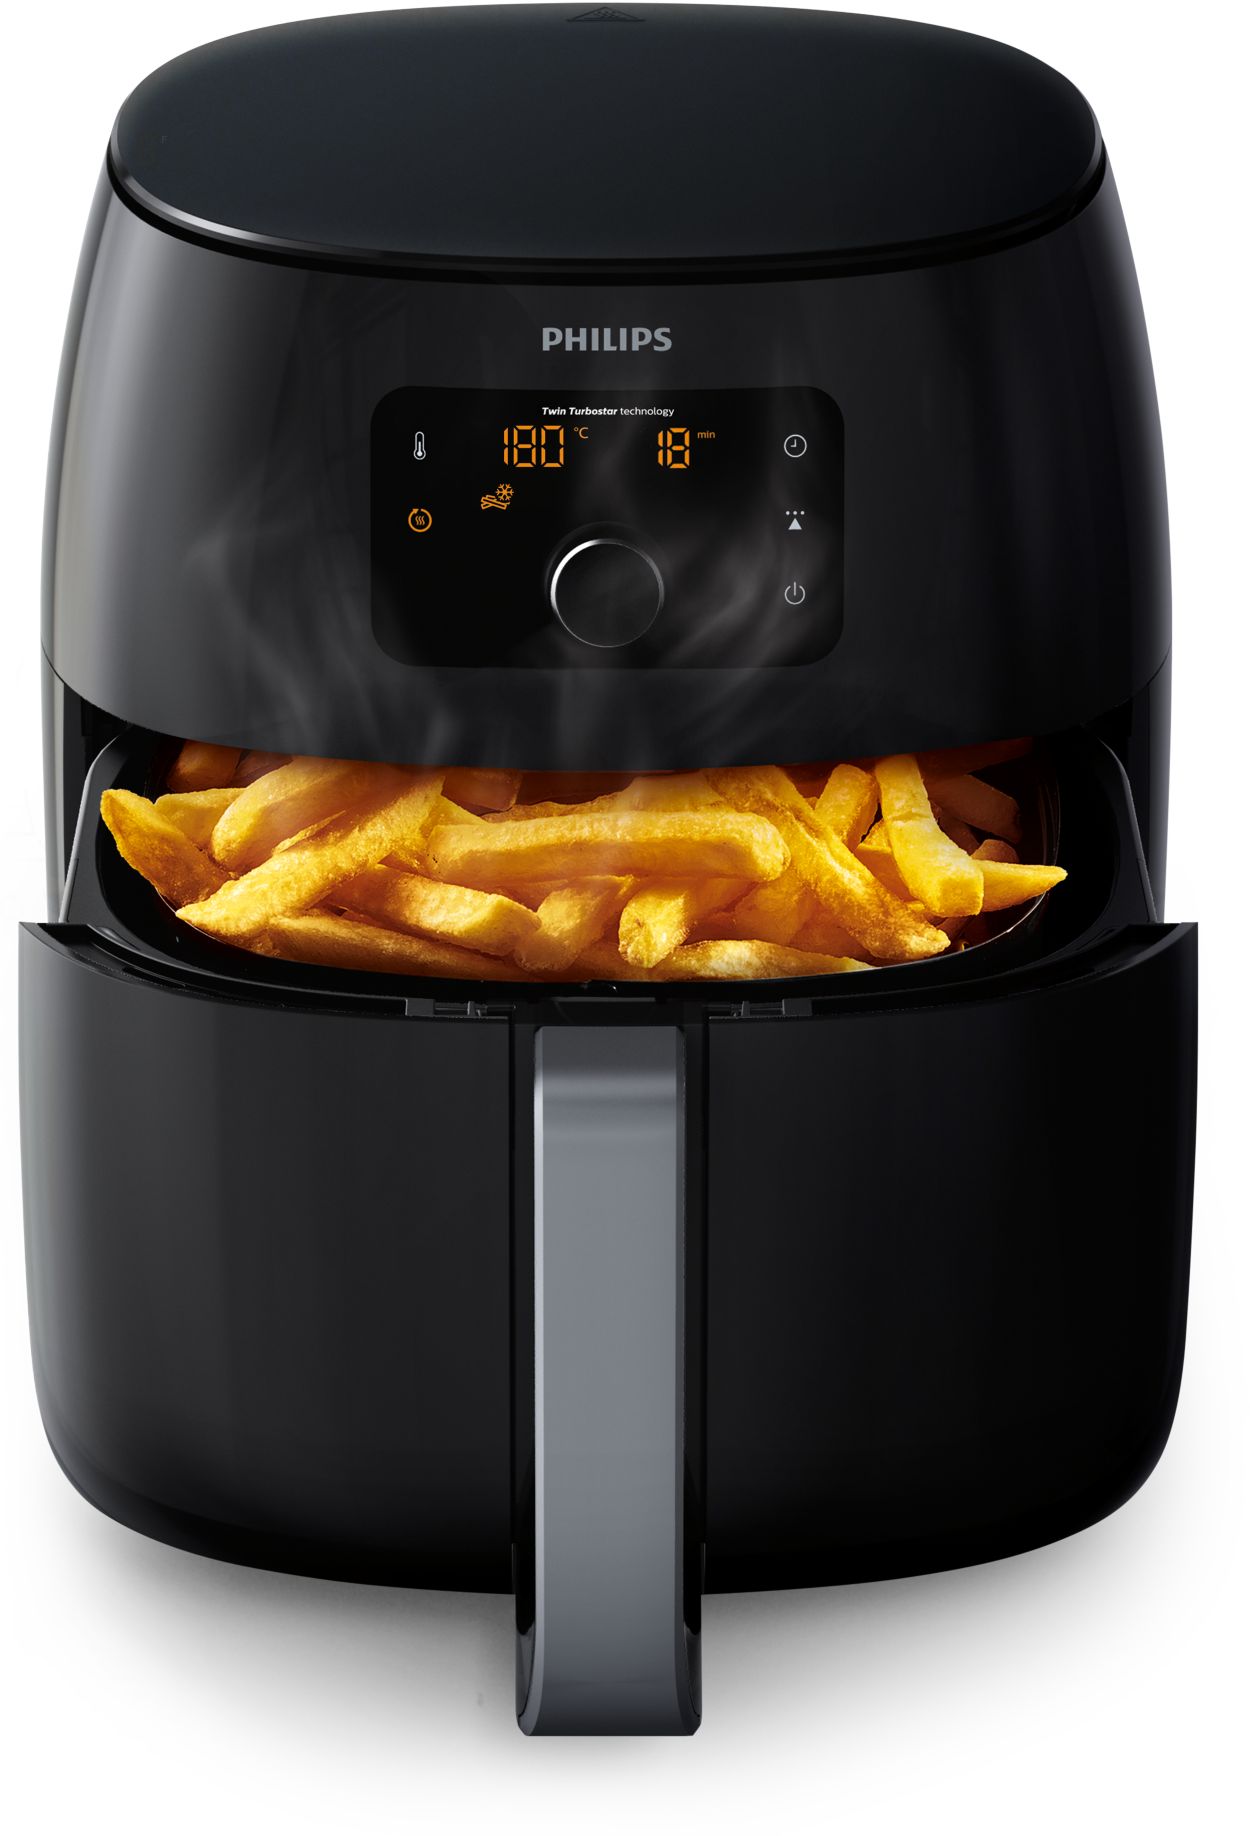 Unboxing and review of Philips Airfryer XXL HD9650/96 